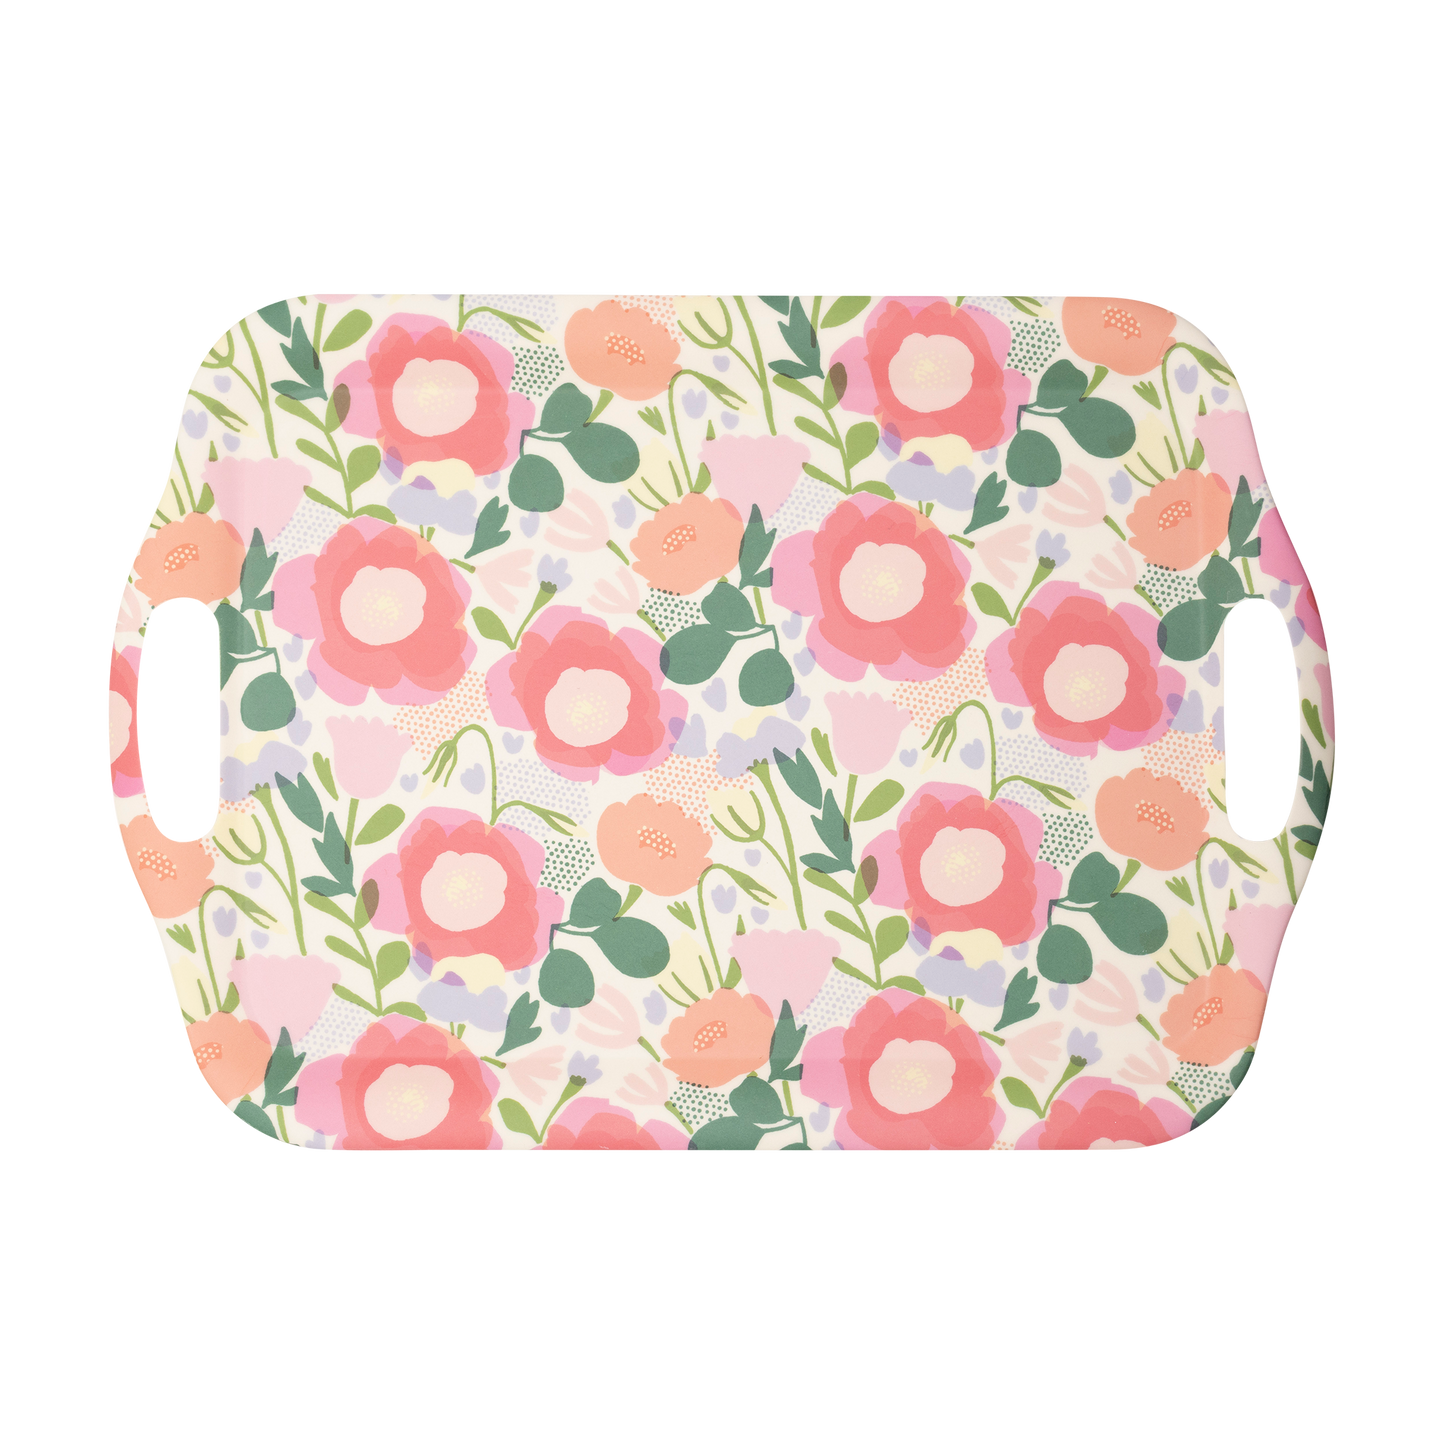 FLO1030 - Floral Tray